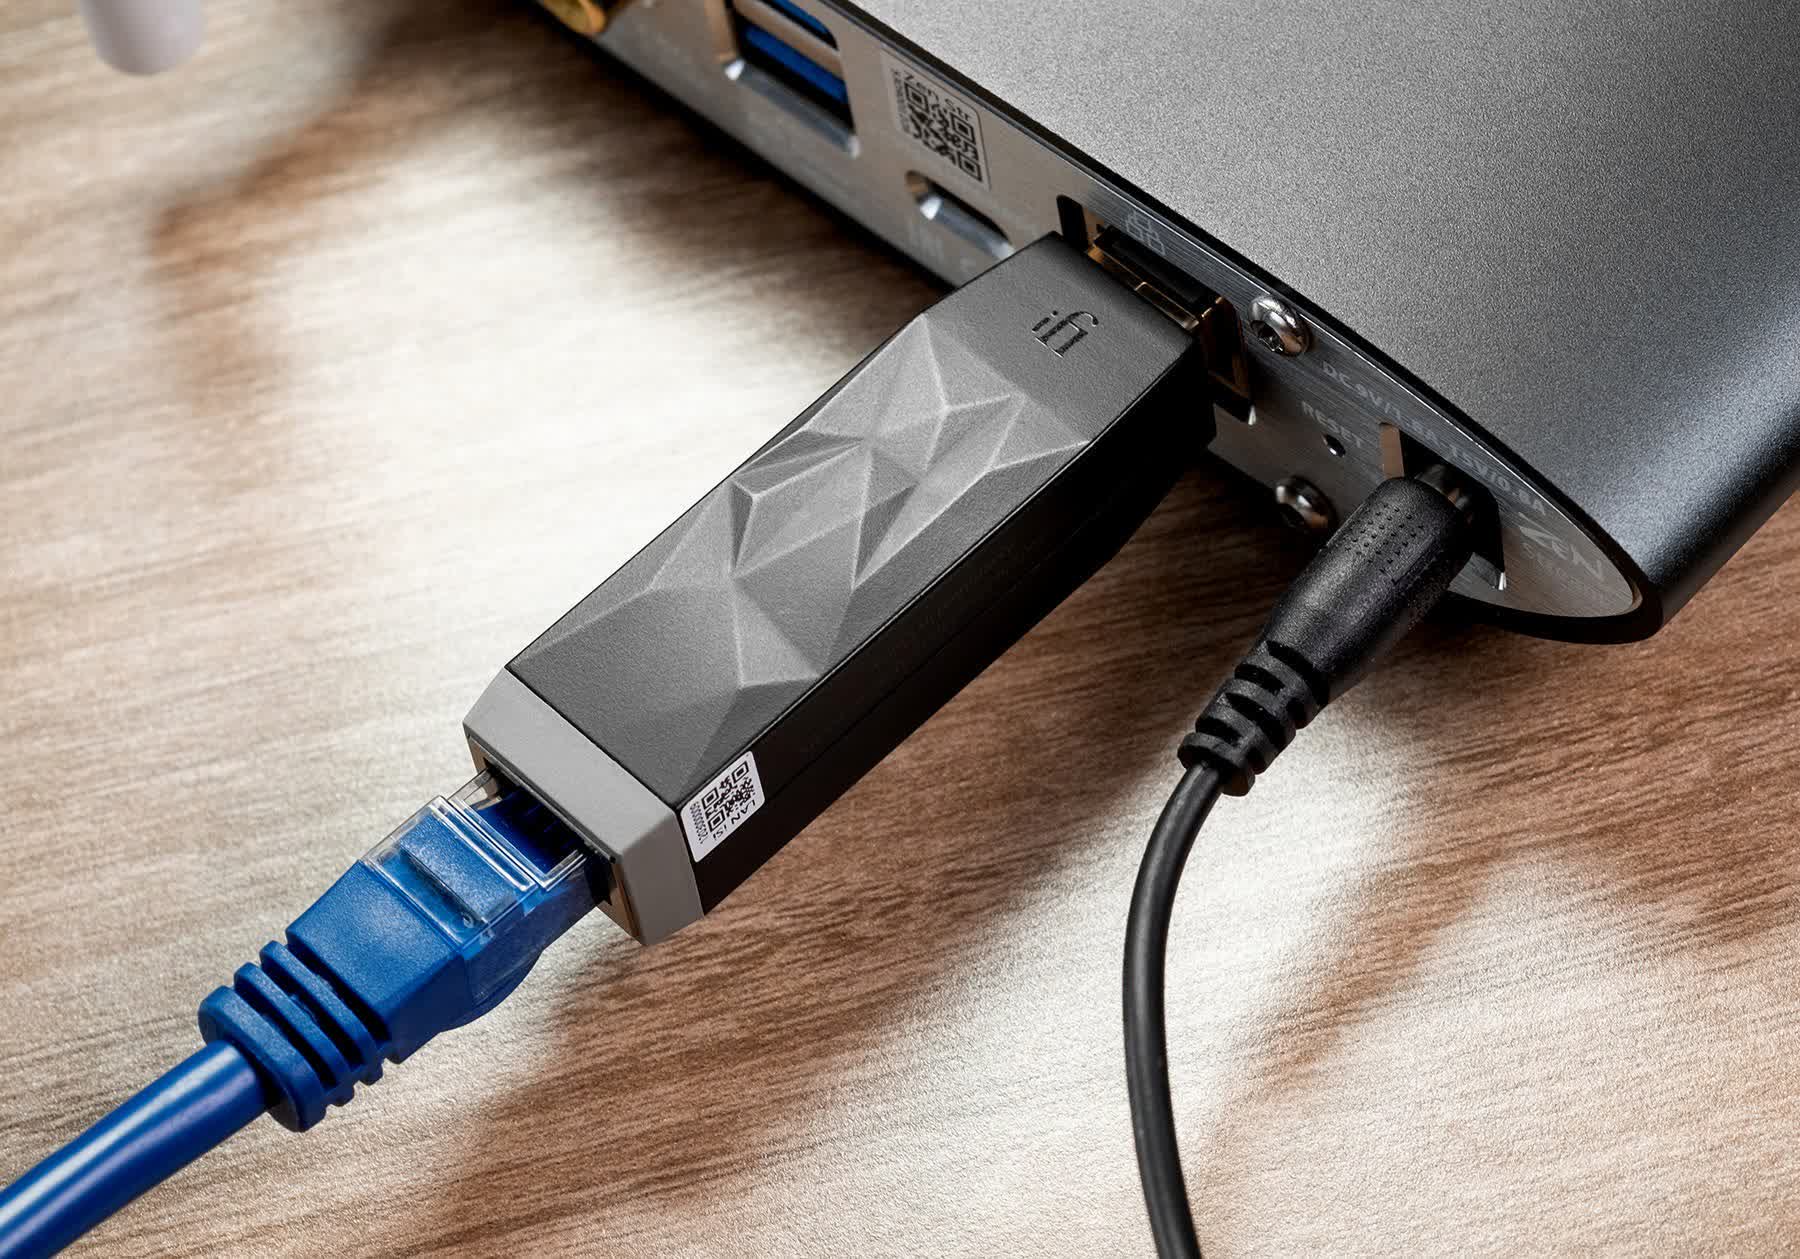 This LAN dongle claims to eliminate network audio interference